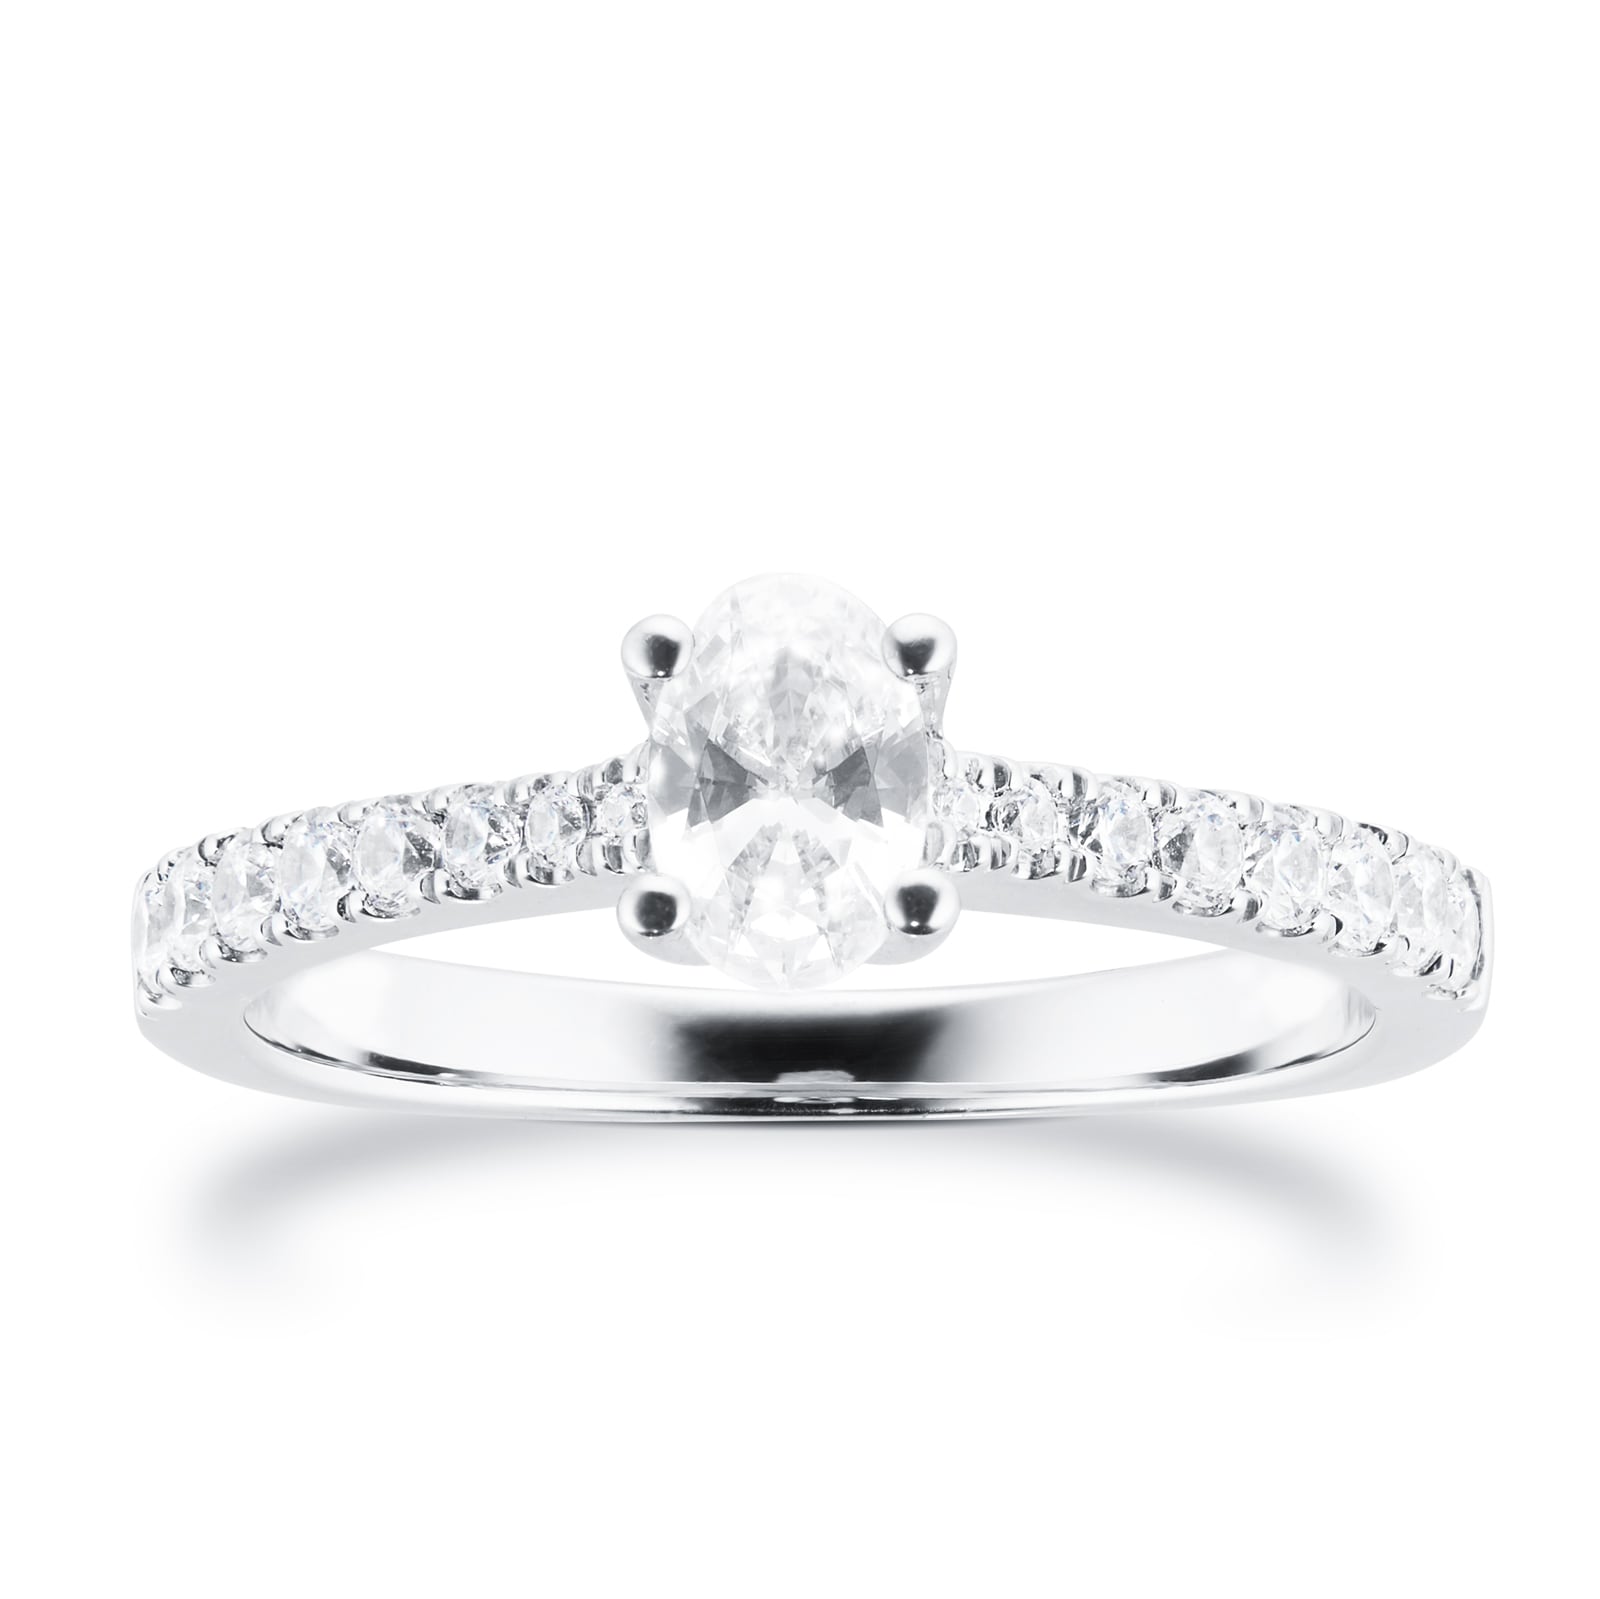 Platinum 0.70cttw Goldsmiths Brightest Diamond Oval Cut Solitaire Engagement Ring - Ring Size J